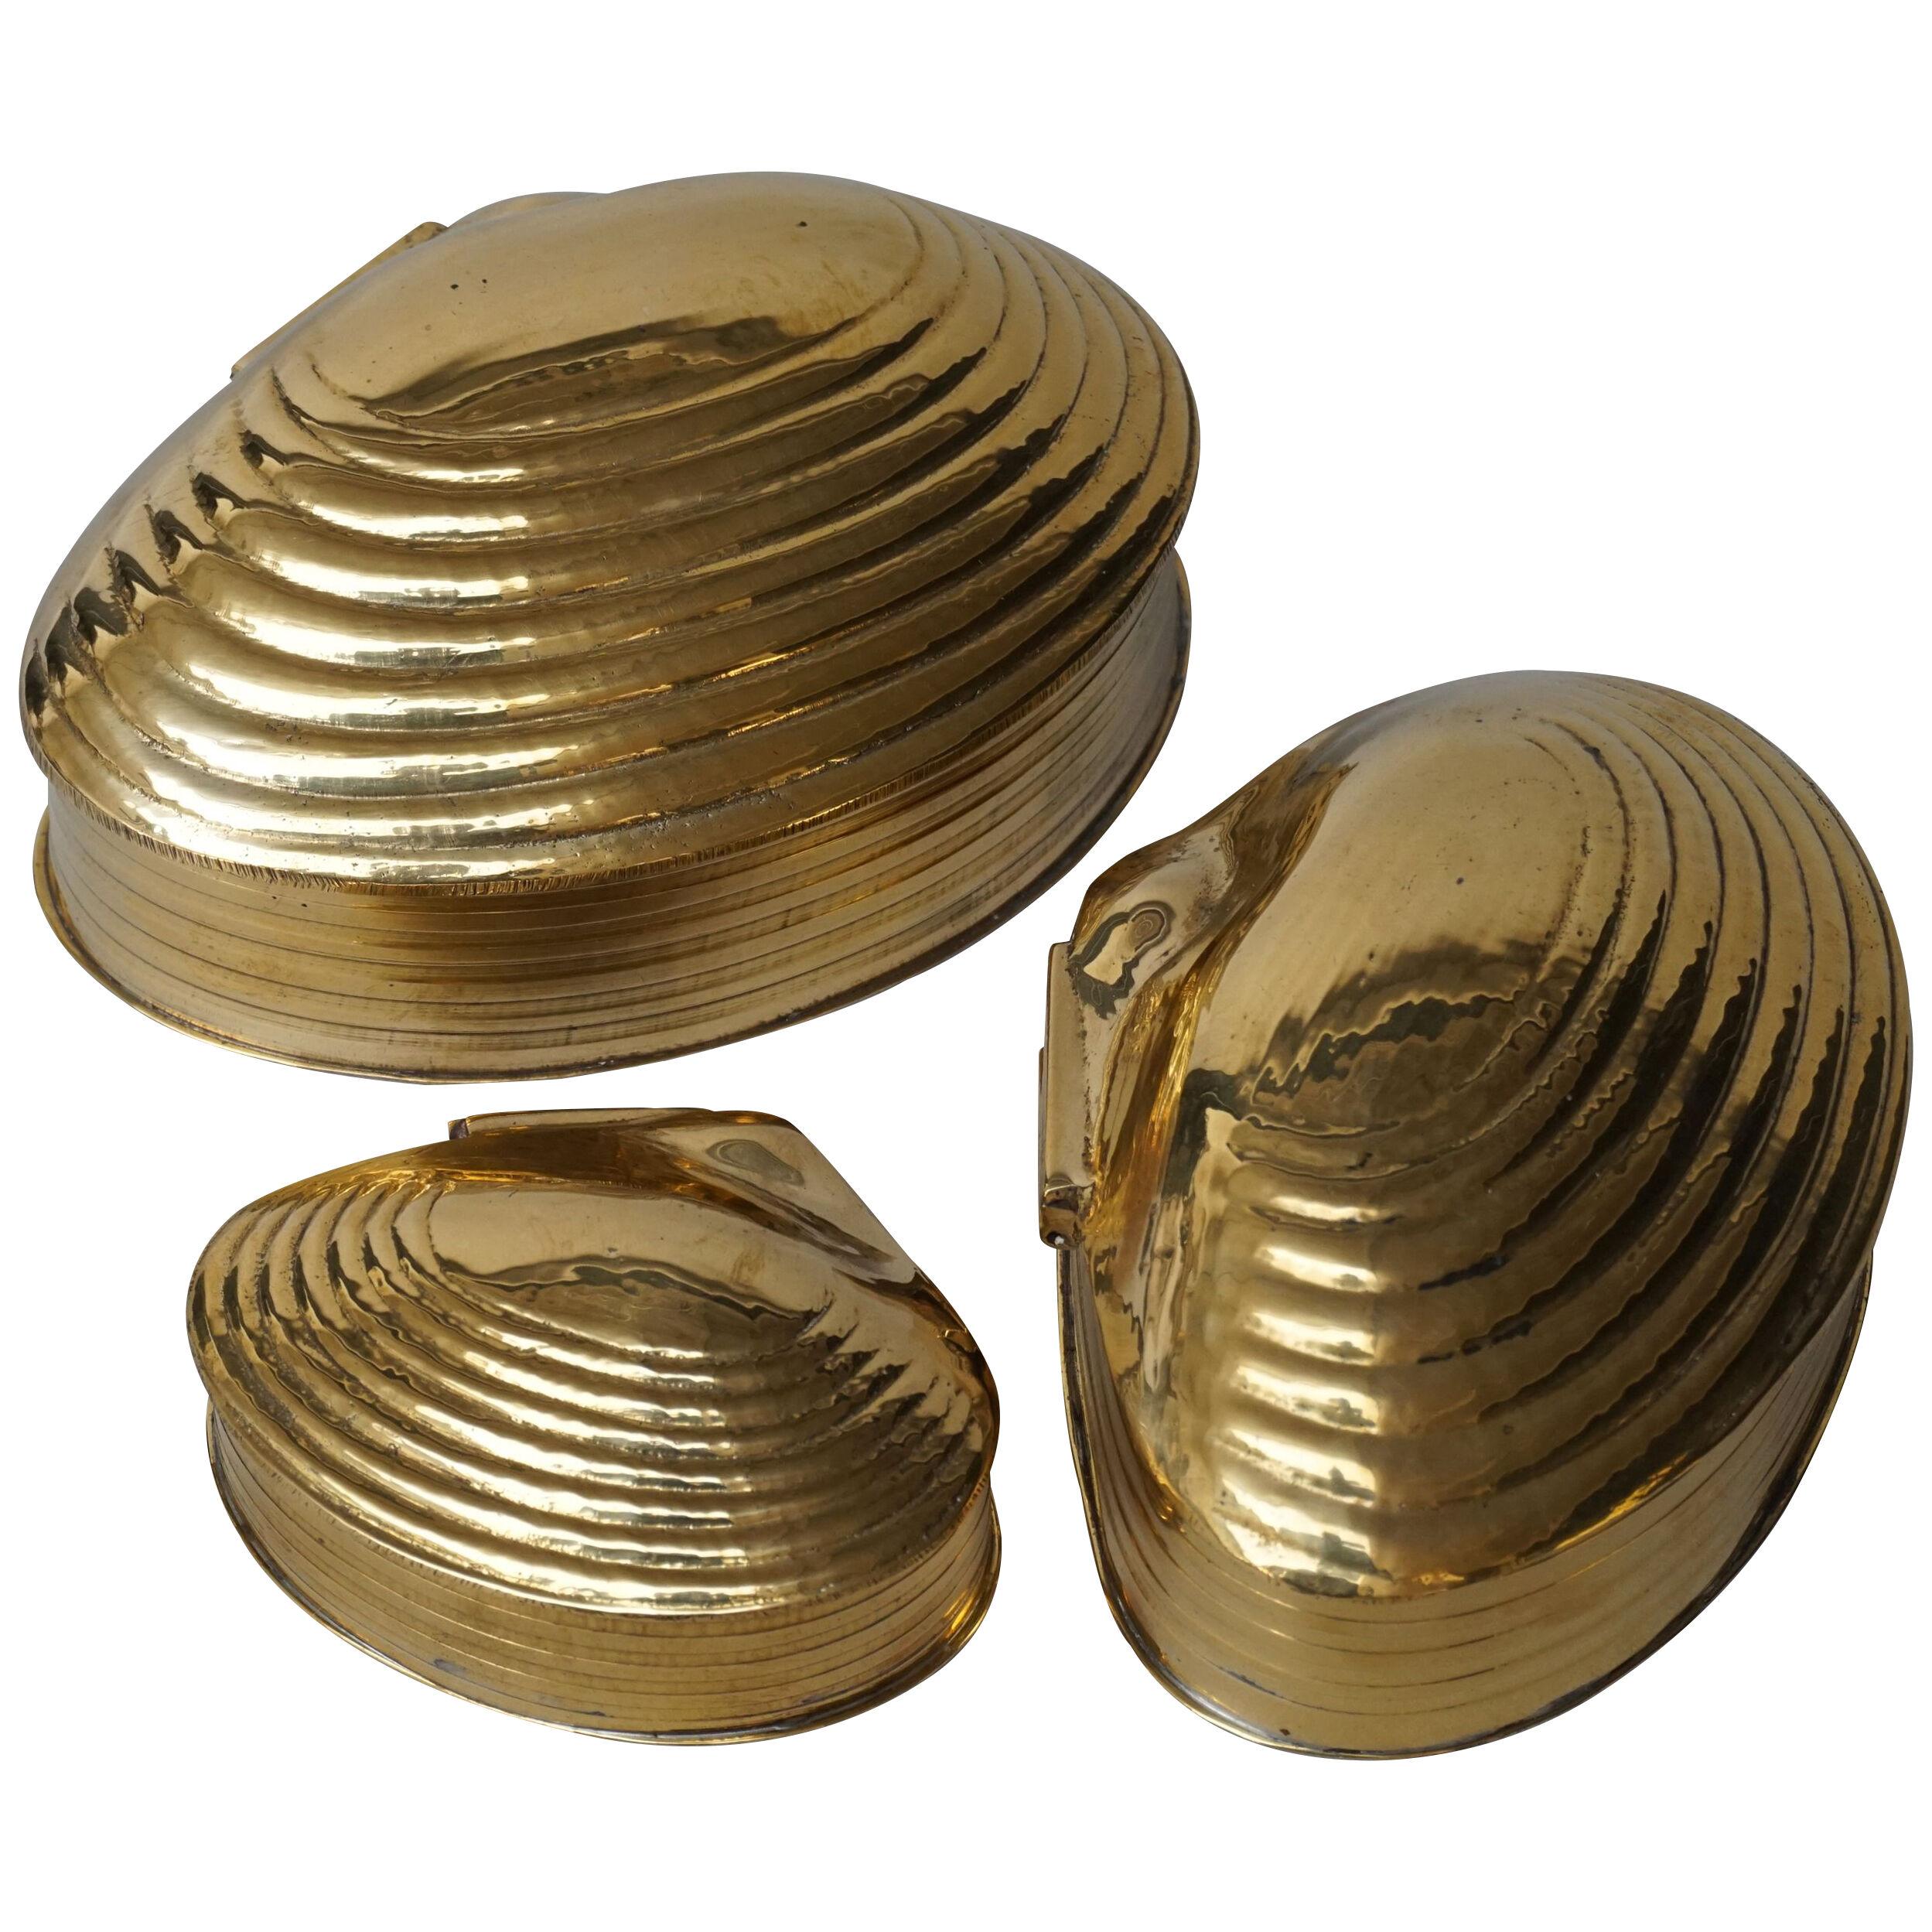 1970s Spanish Brass Clam Shell Nesting Set of Three Hinged Lid Trinket Boxes